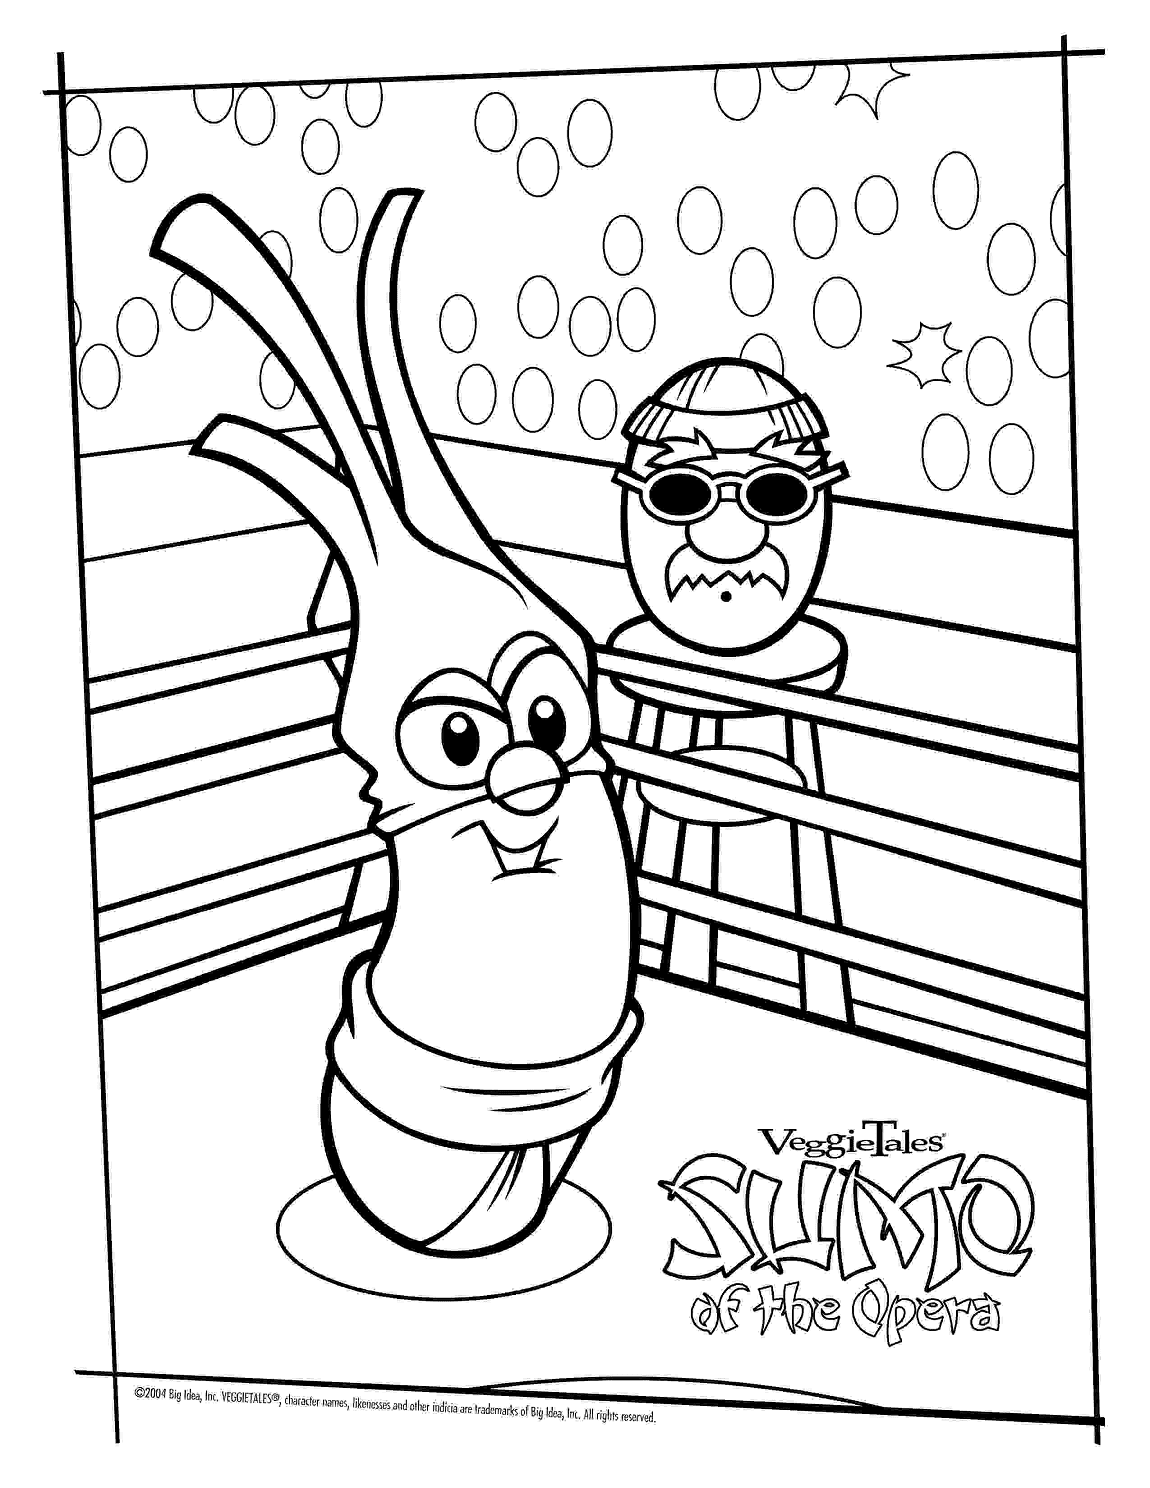 VeggieTales Sumo of the Opera Coloring Pages